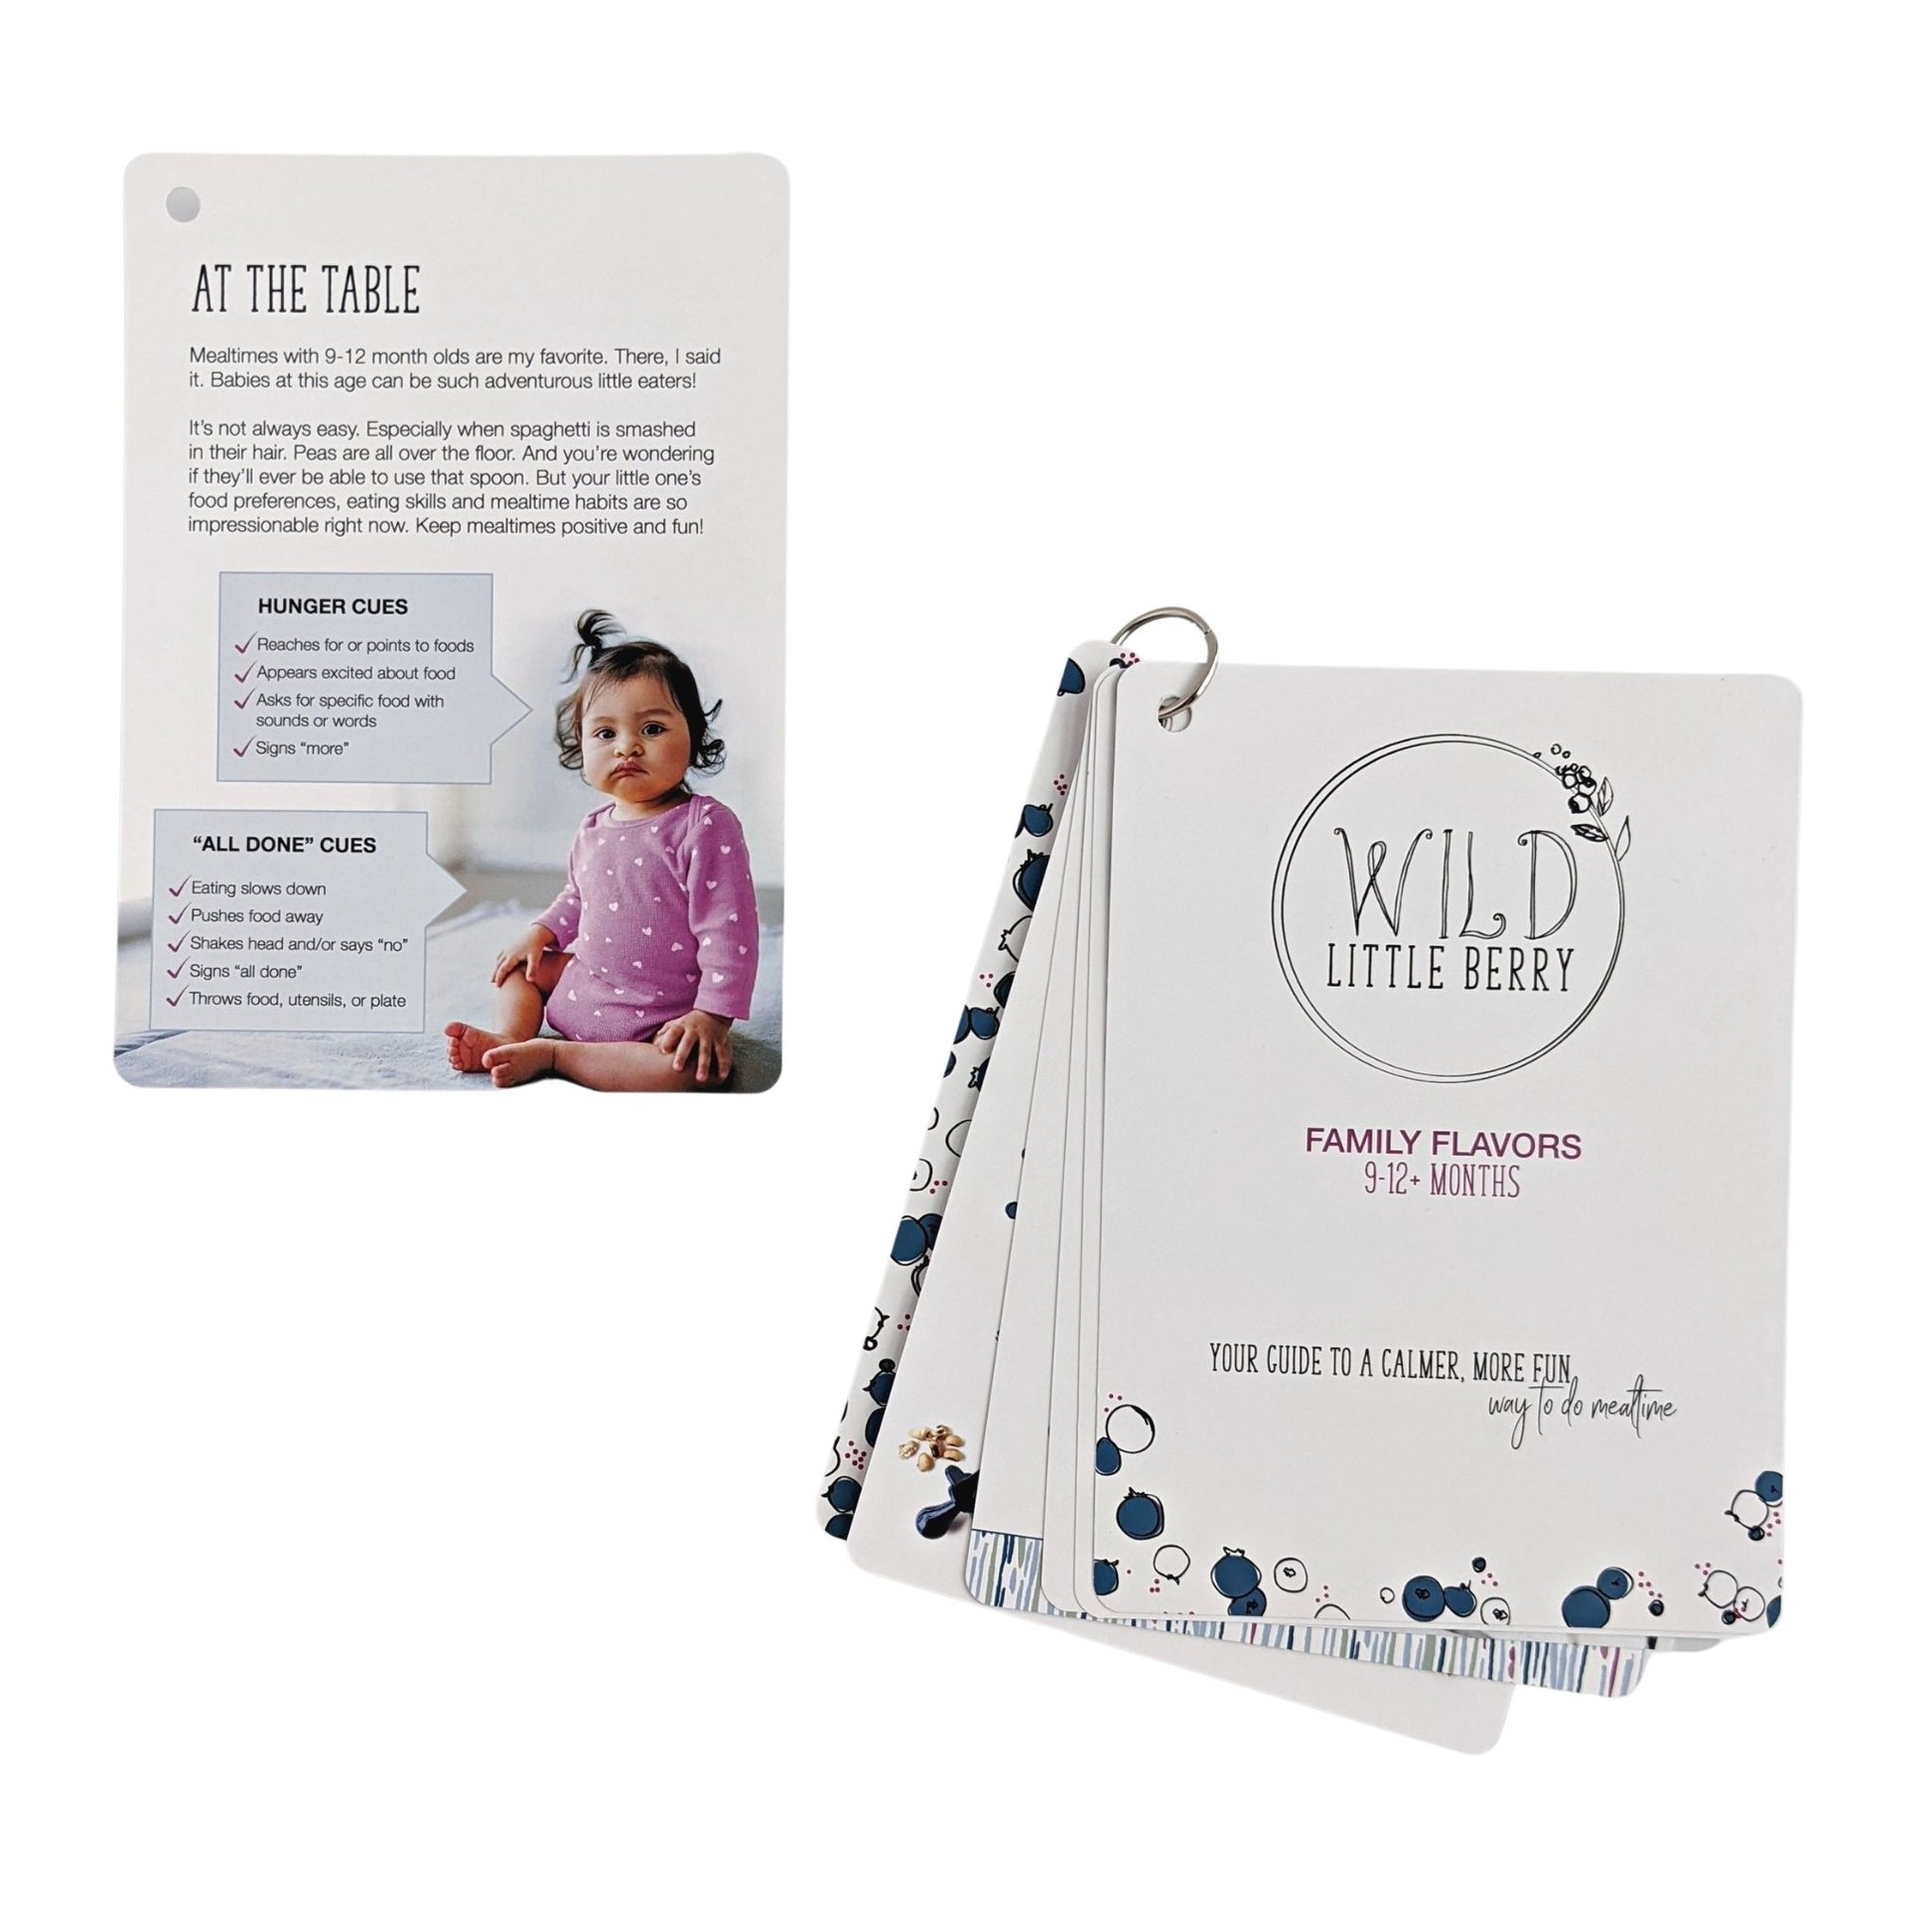 Wild Little Berry Family Flavors Mealtime Kit Guide to calmer, more fun mealtimes with your 9-12 month old baby